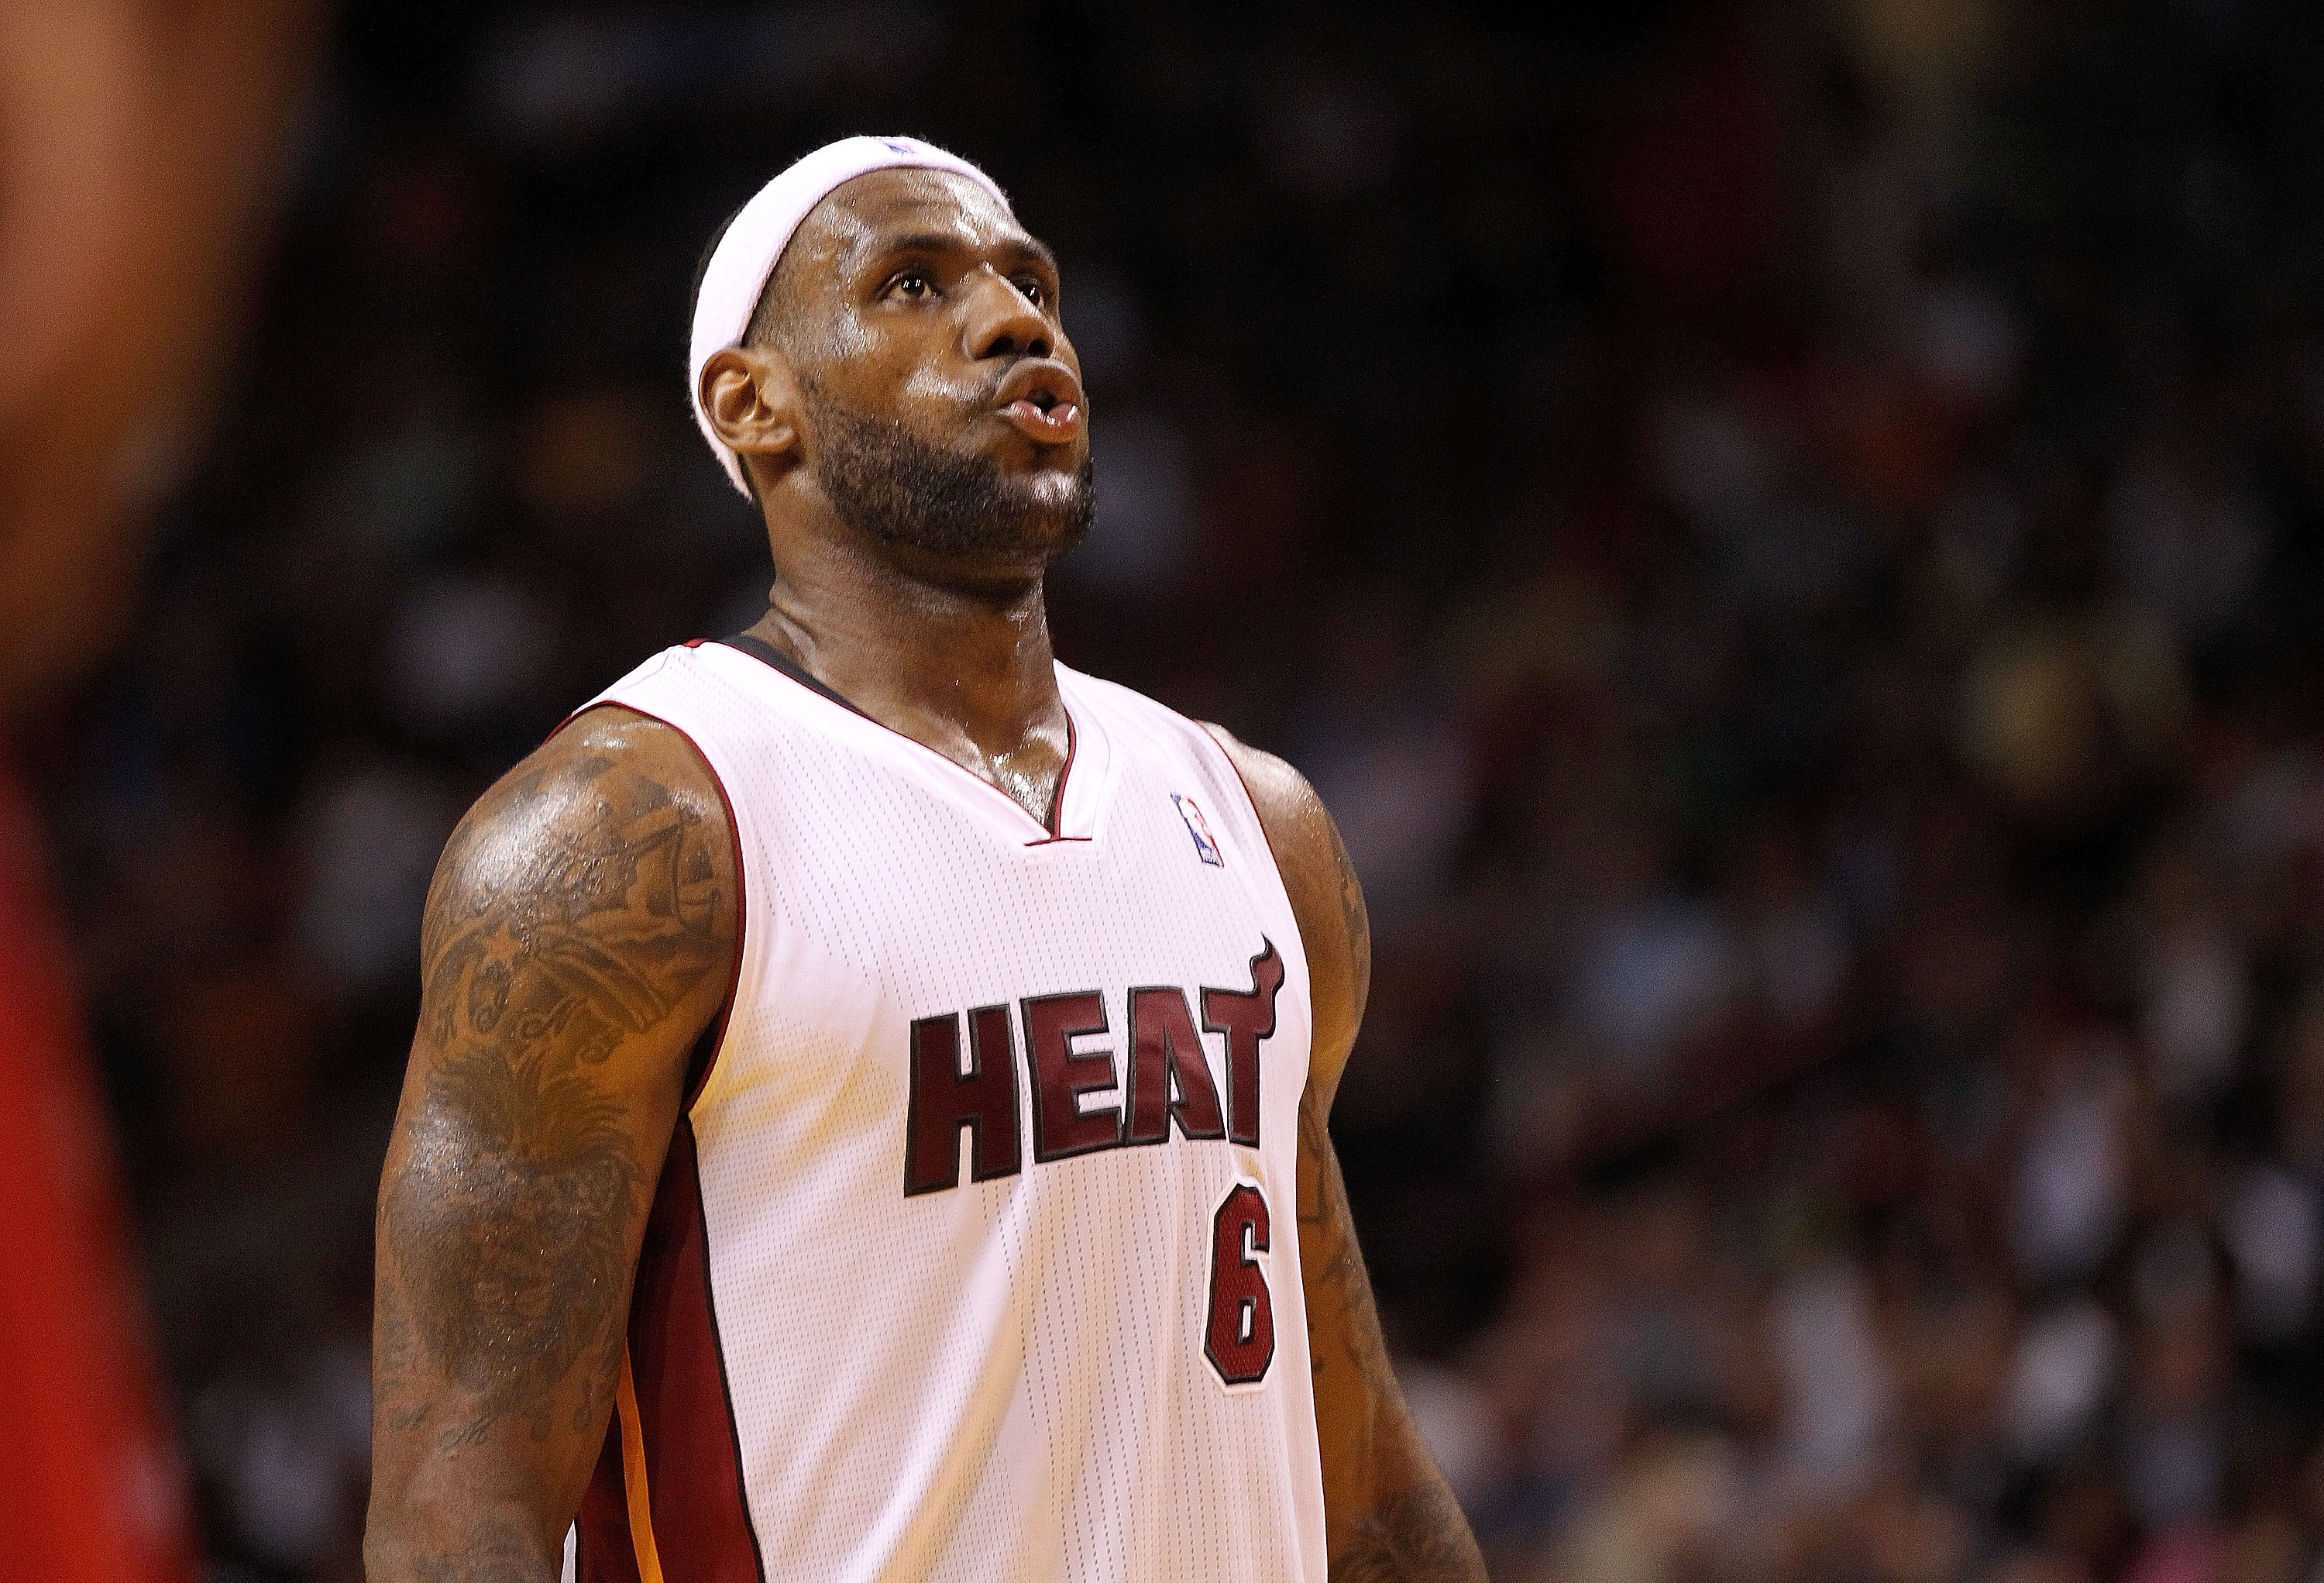 LeBron James' Heat jersey now top-selling in NBA, tops Kobe Bryant's 